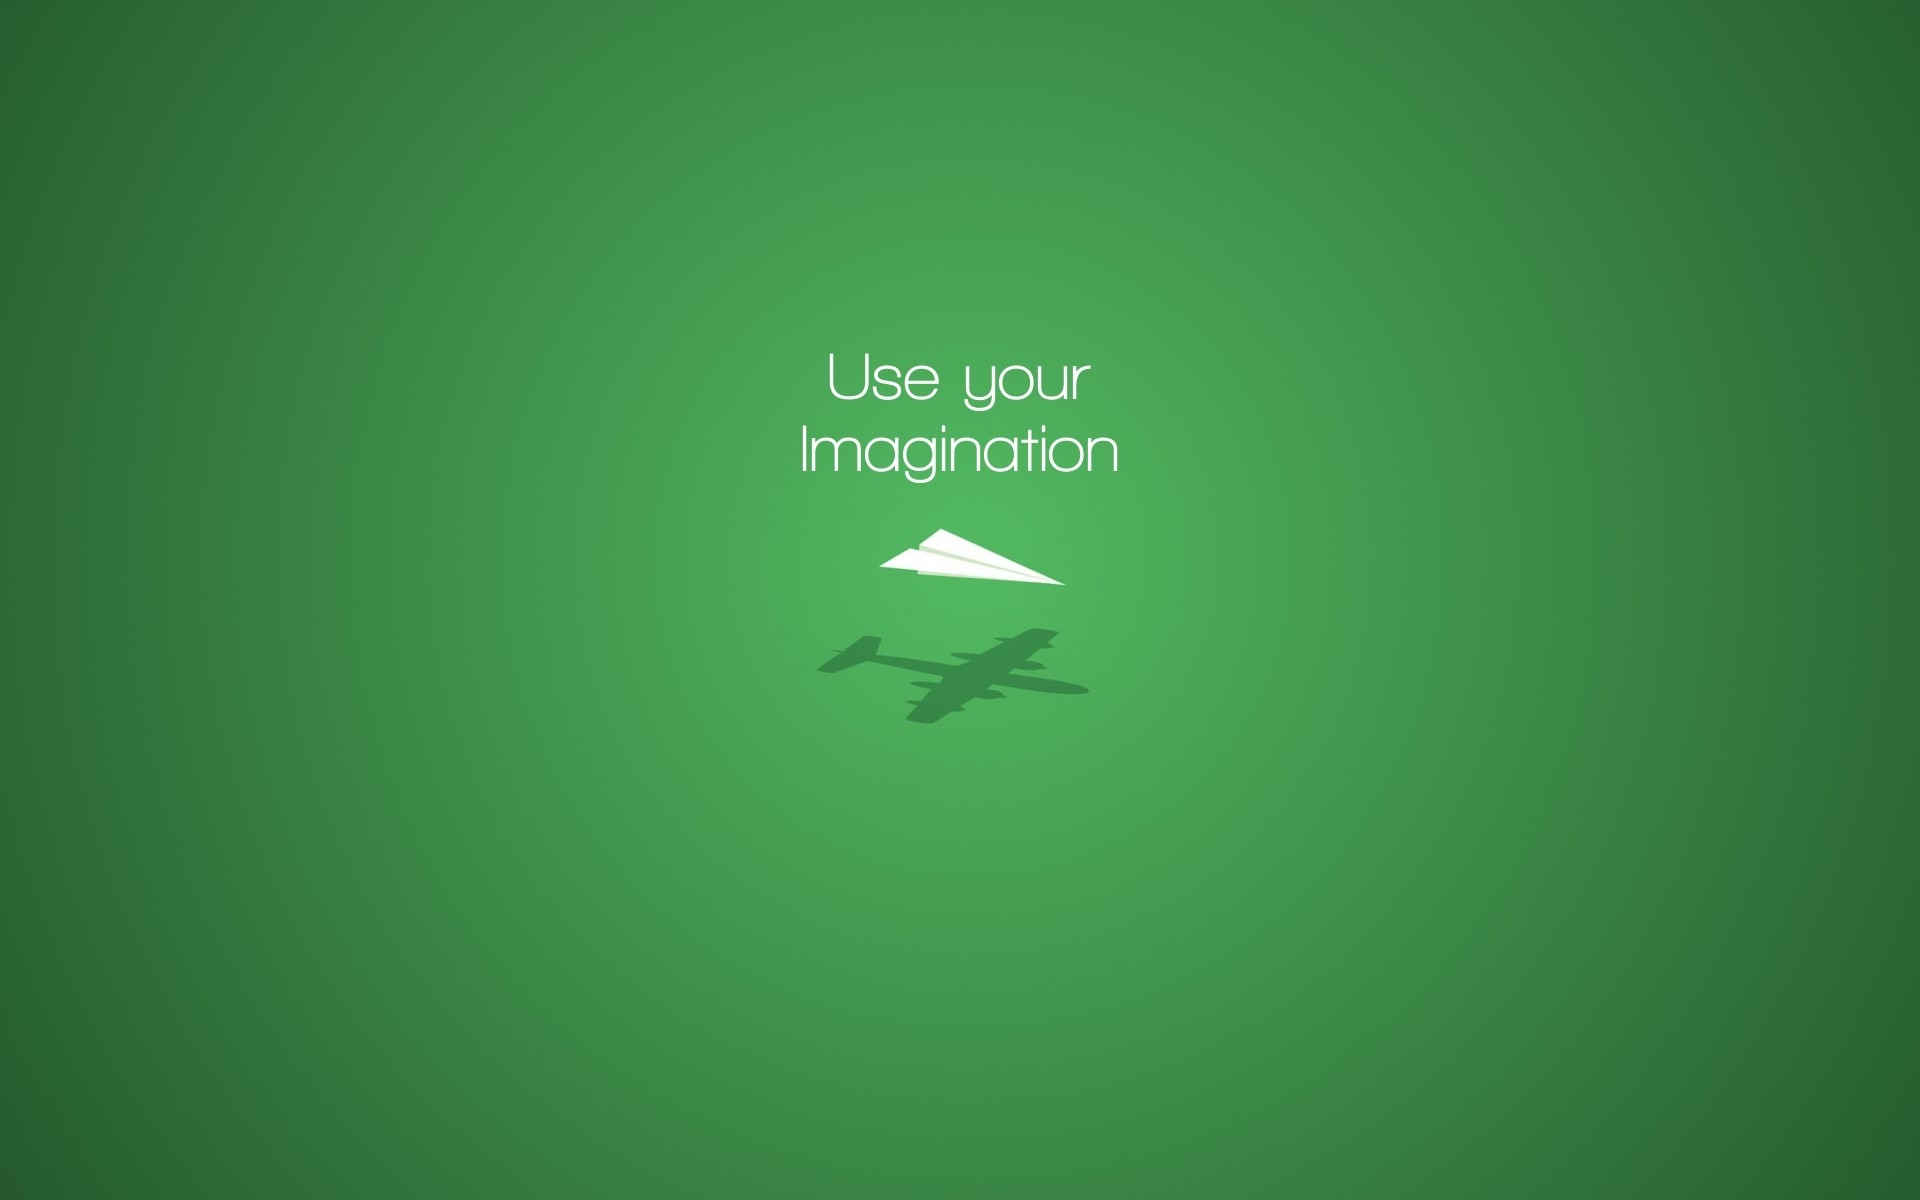 android green, misc, airplane, motivational